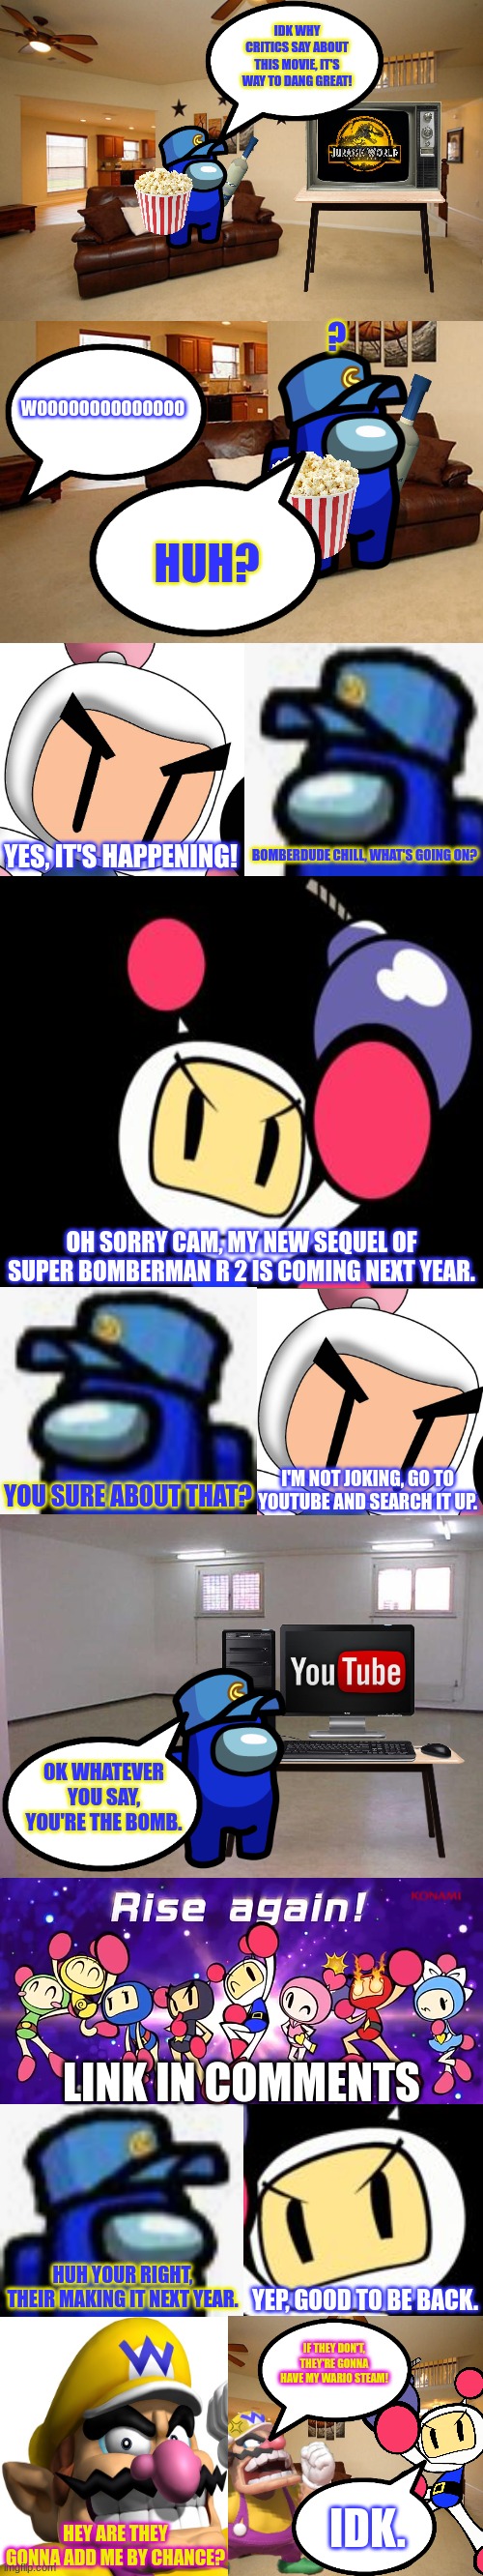 Bomberman gets a new game (What's your thoughts and opinion on this upcoming bomberman game) | image tagged in jurassic park,jurassic world,ocs,bomberman,wario,crossover | made w/ Imgflip meme maker